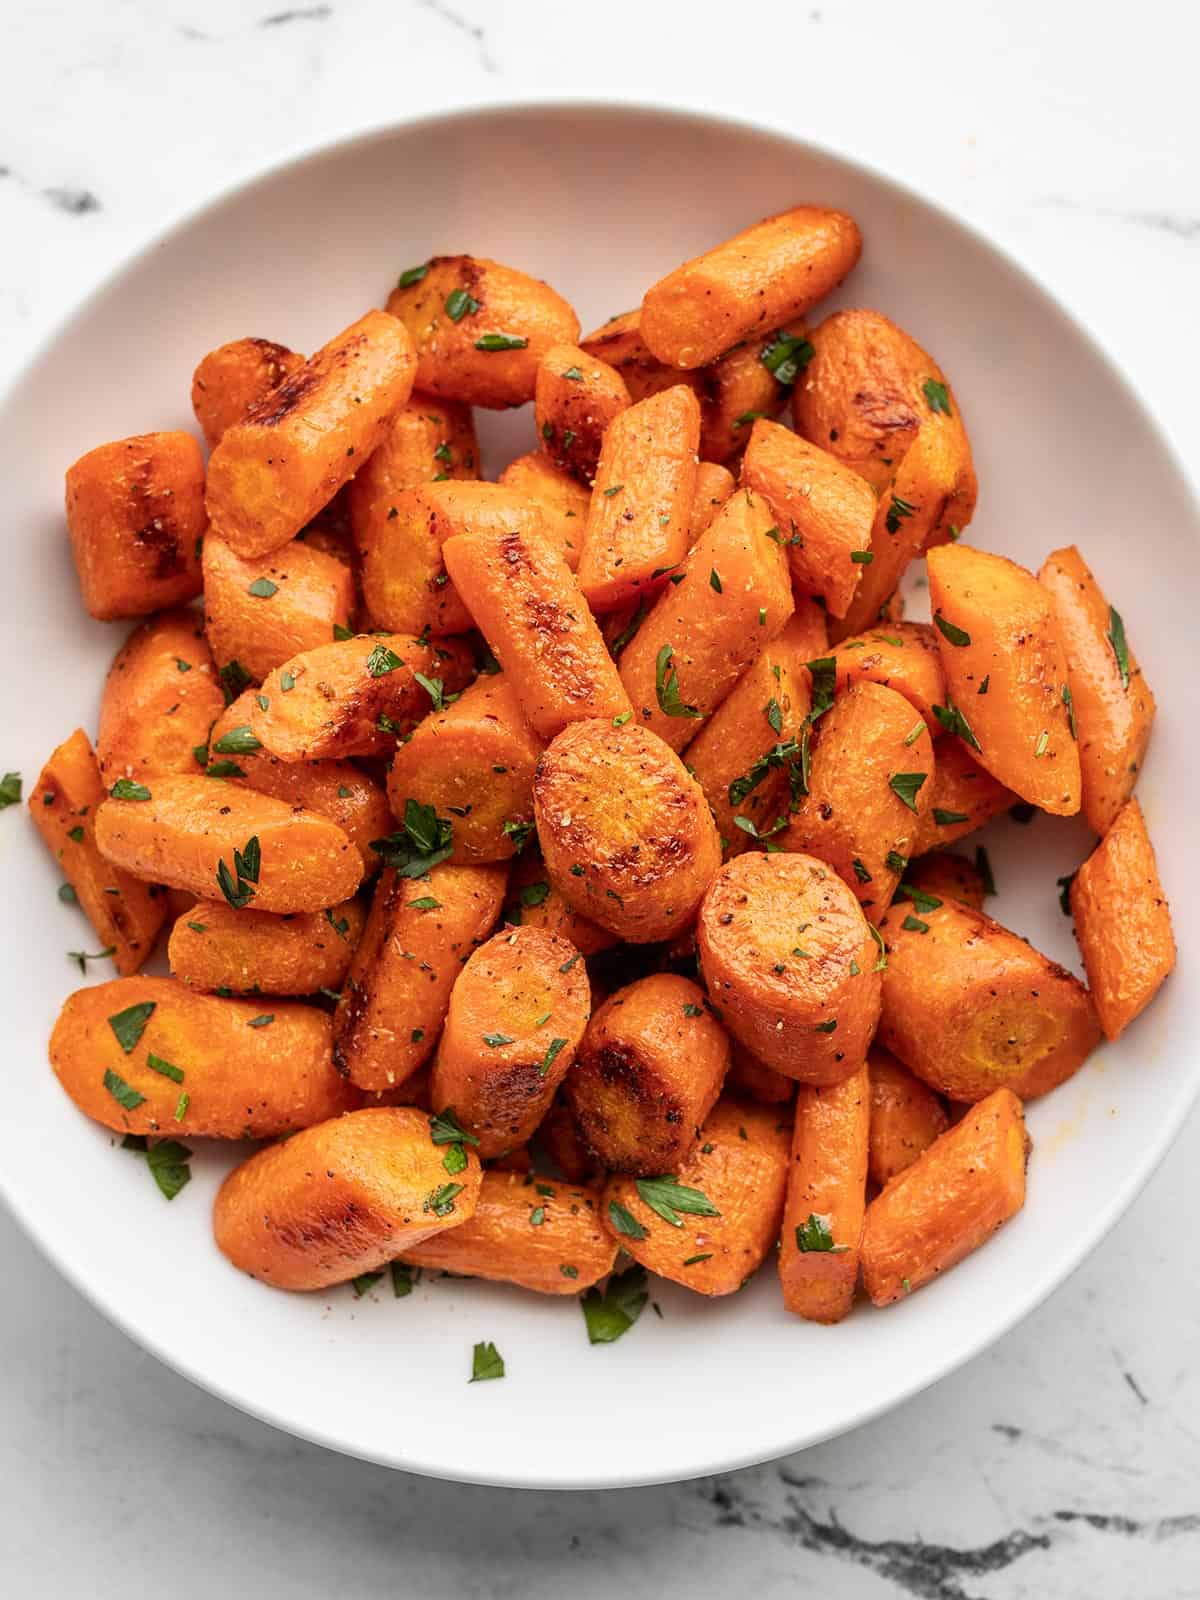 roasted carrots garnished with parsley in a bowl.